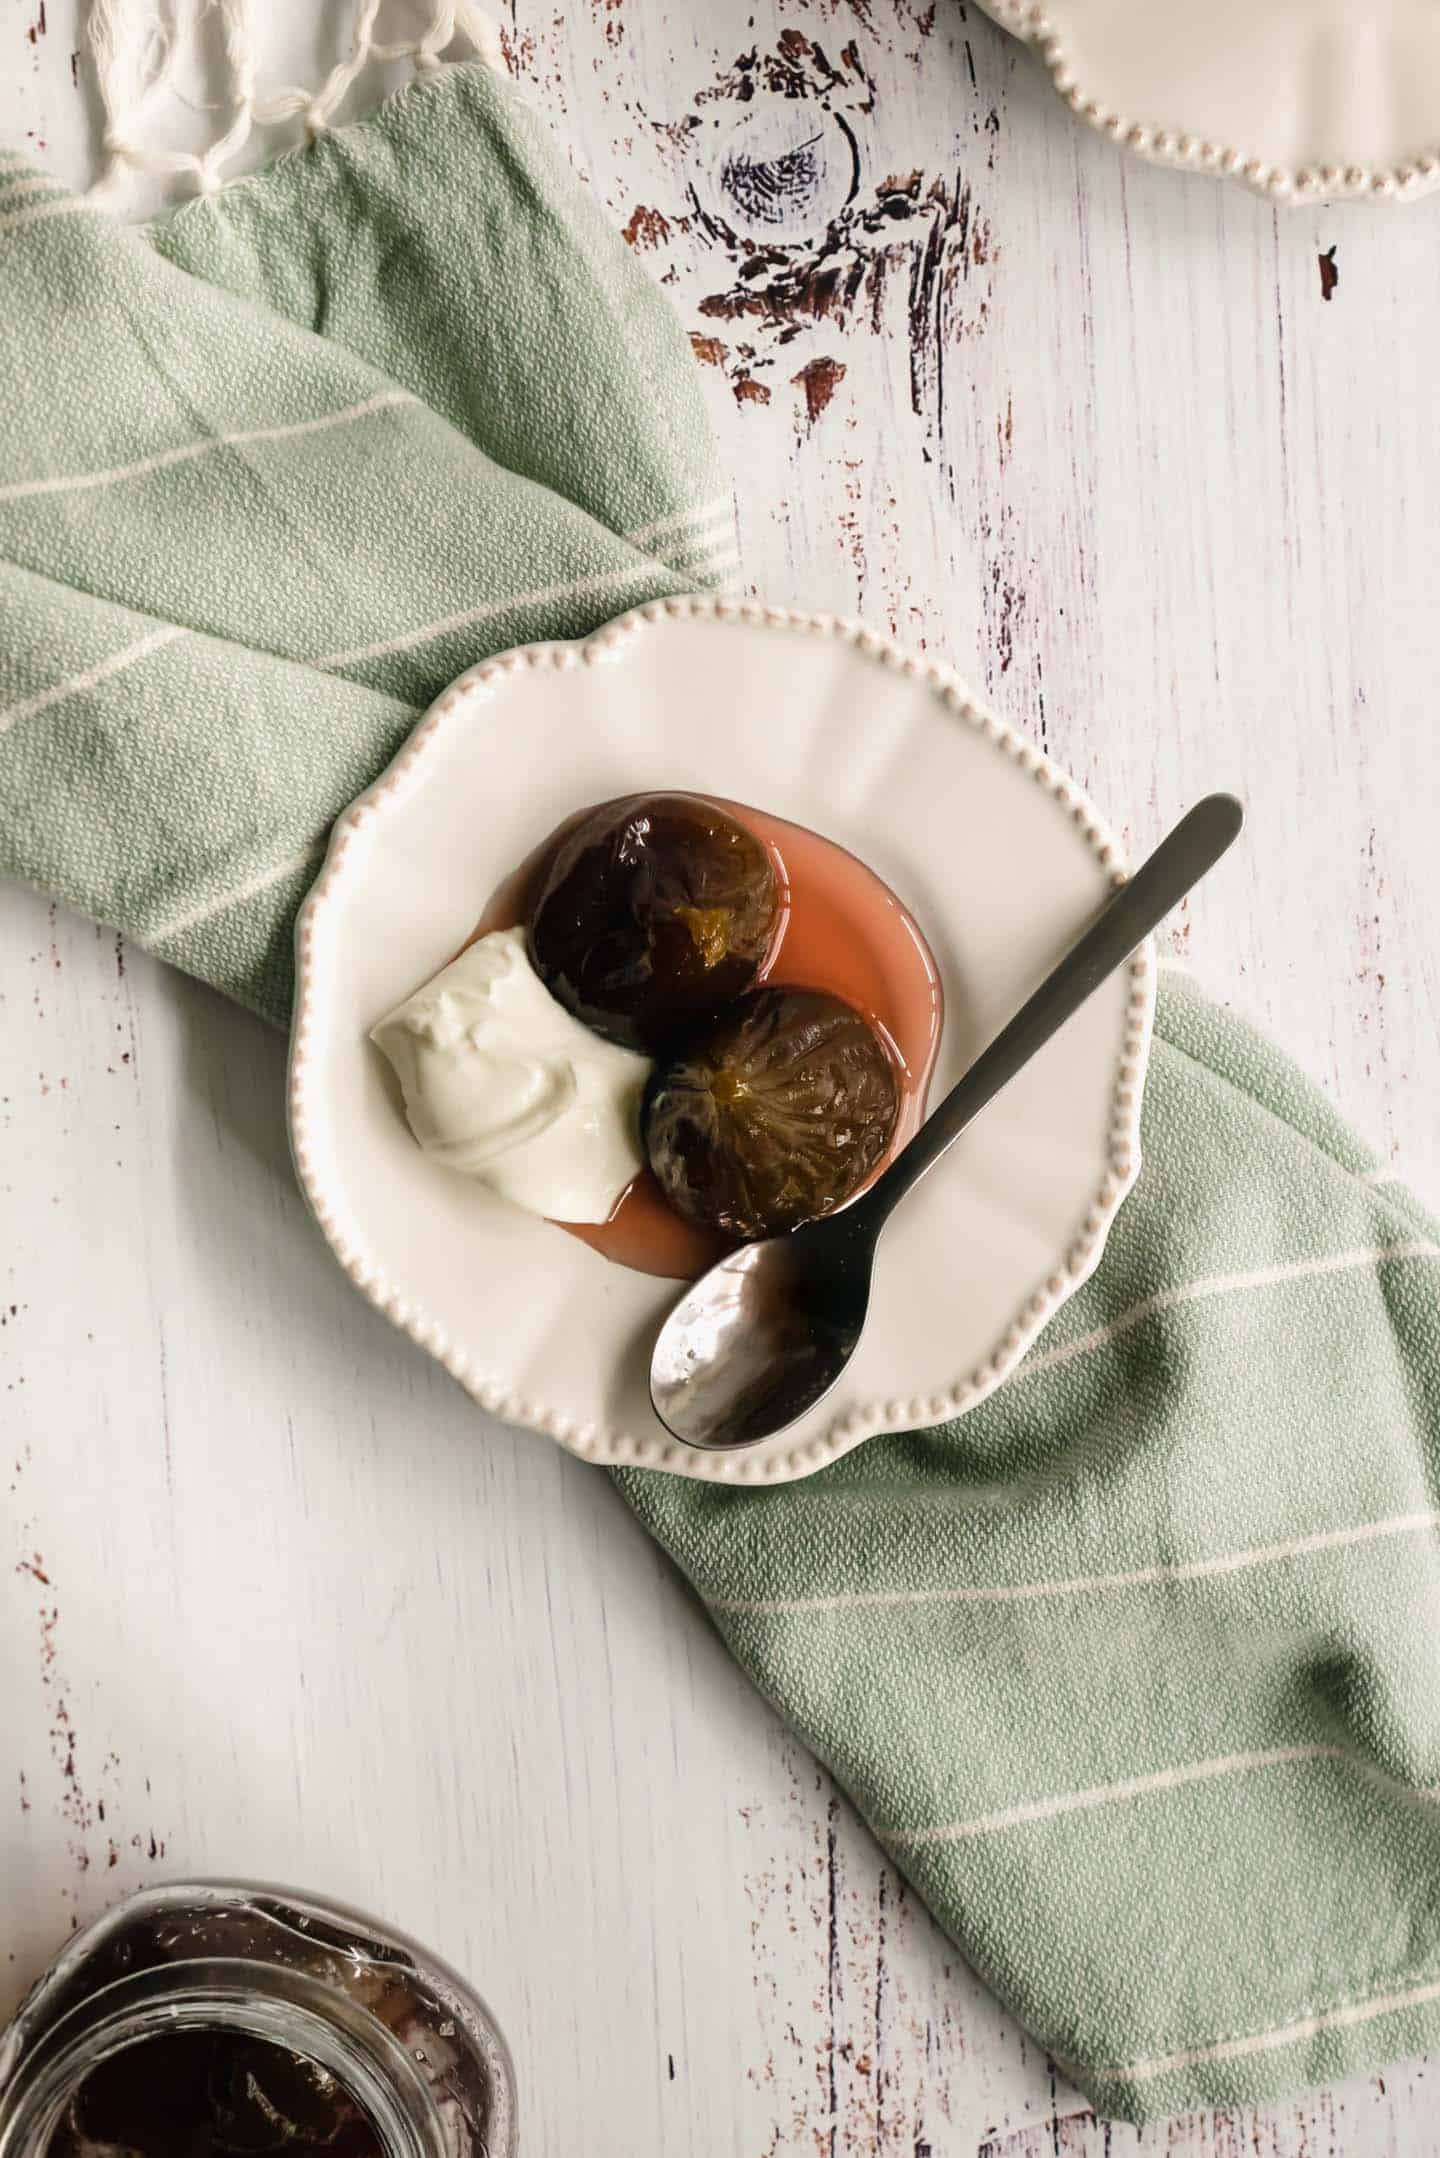 Figs in syrup with whipped cream from above